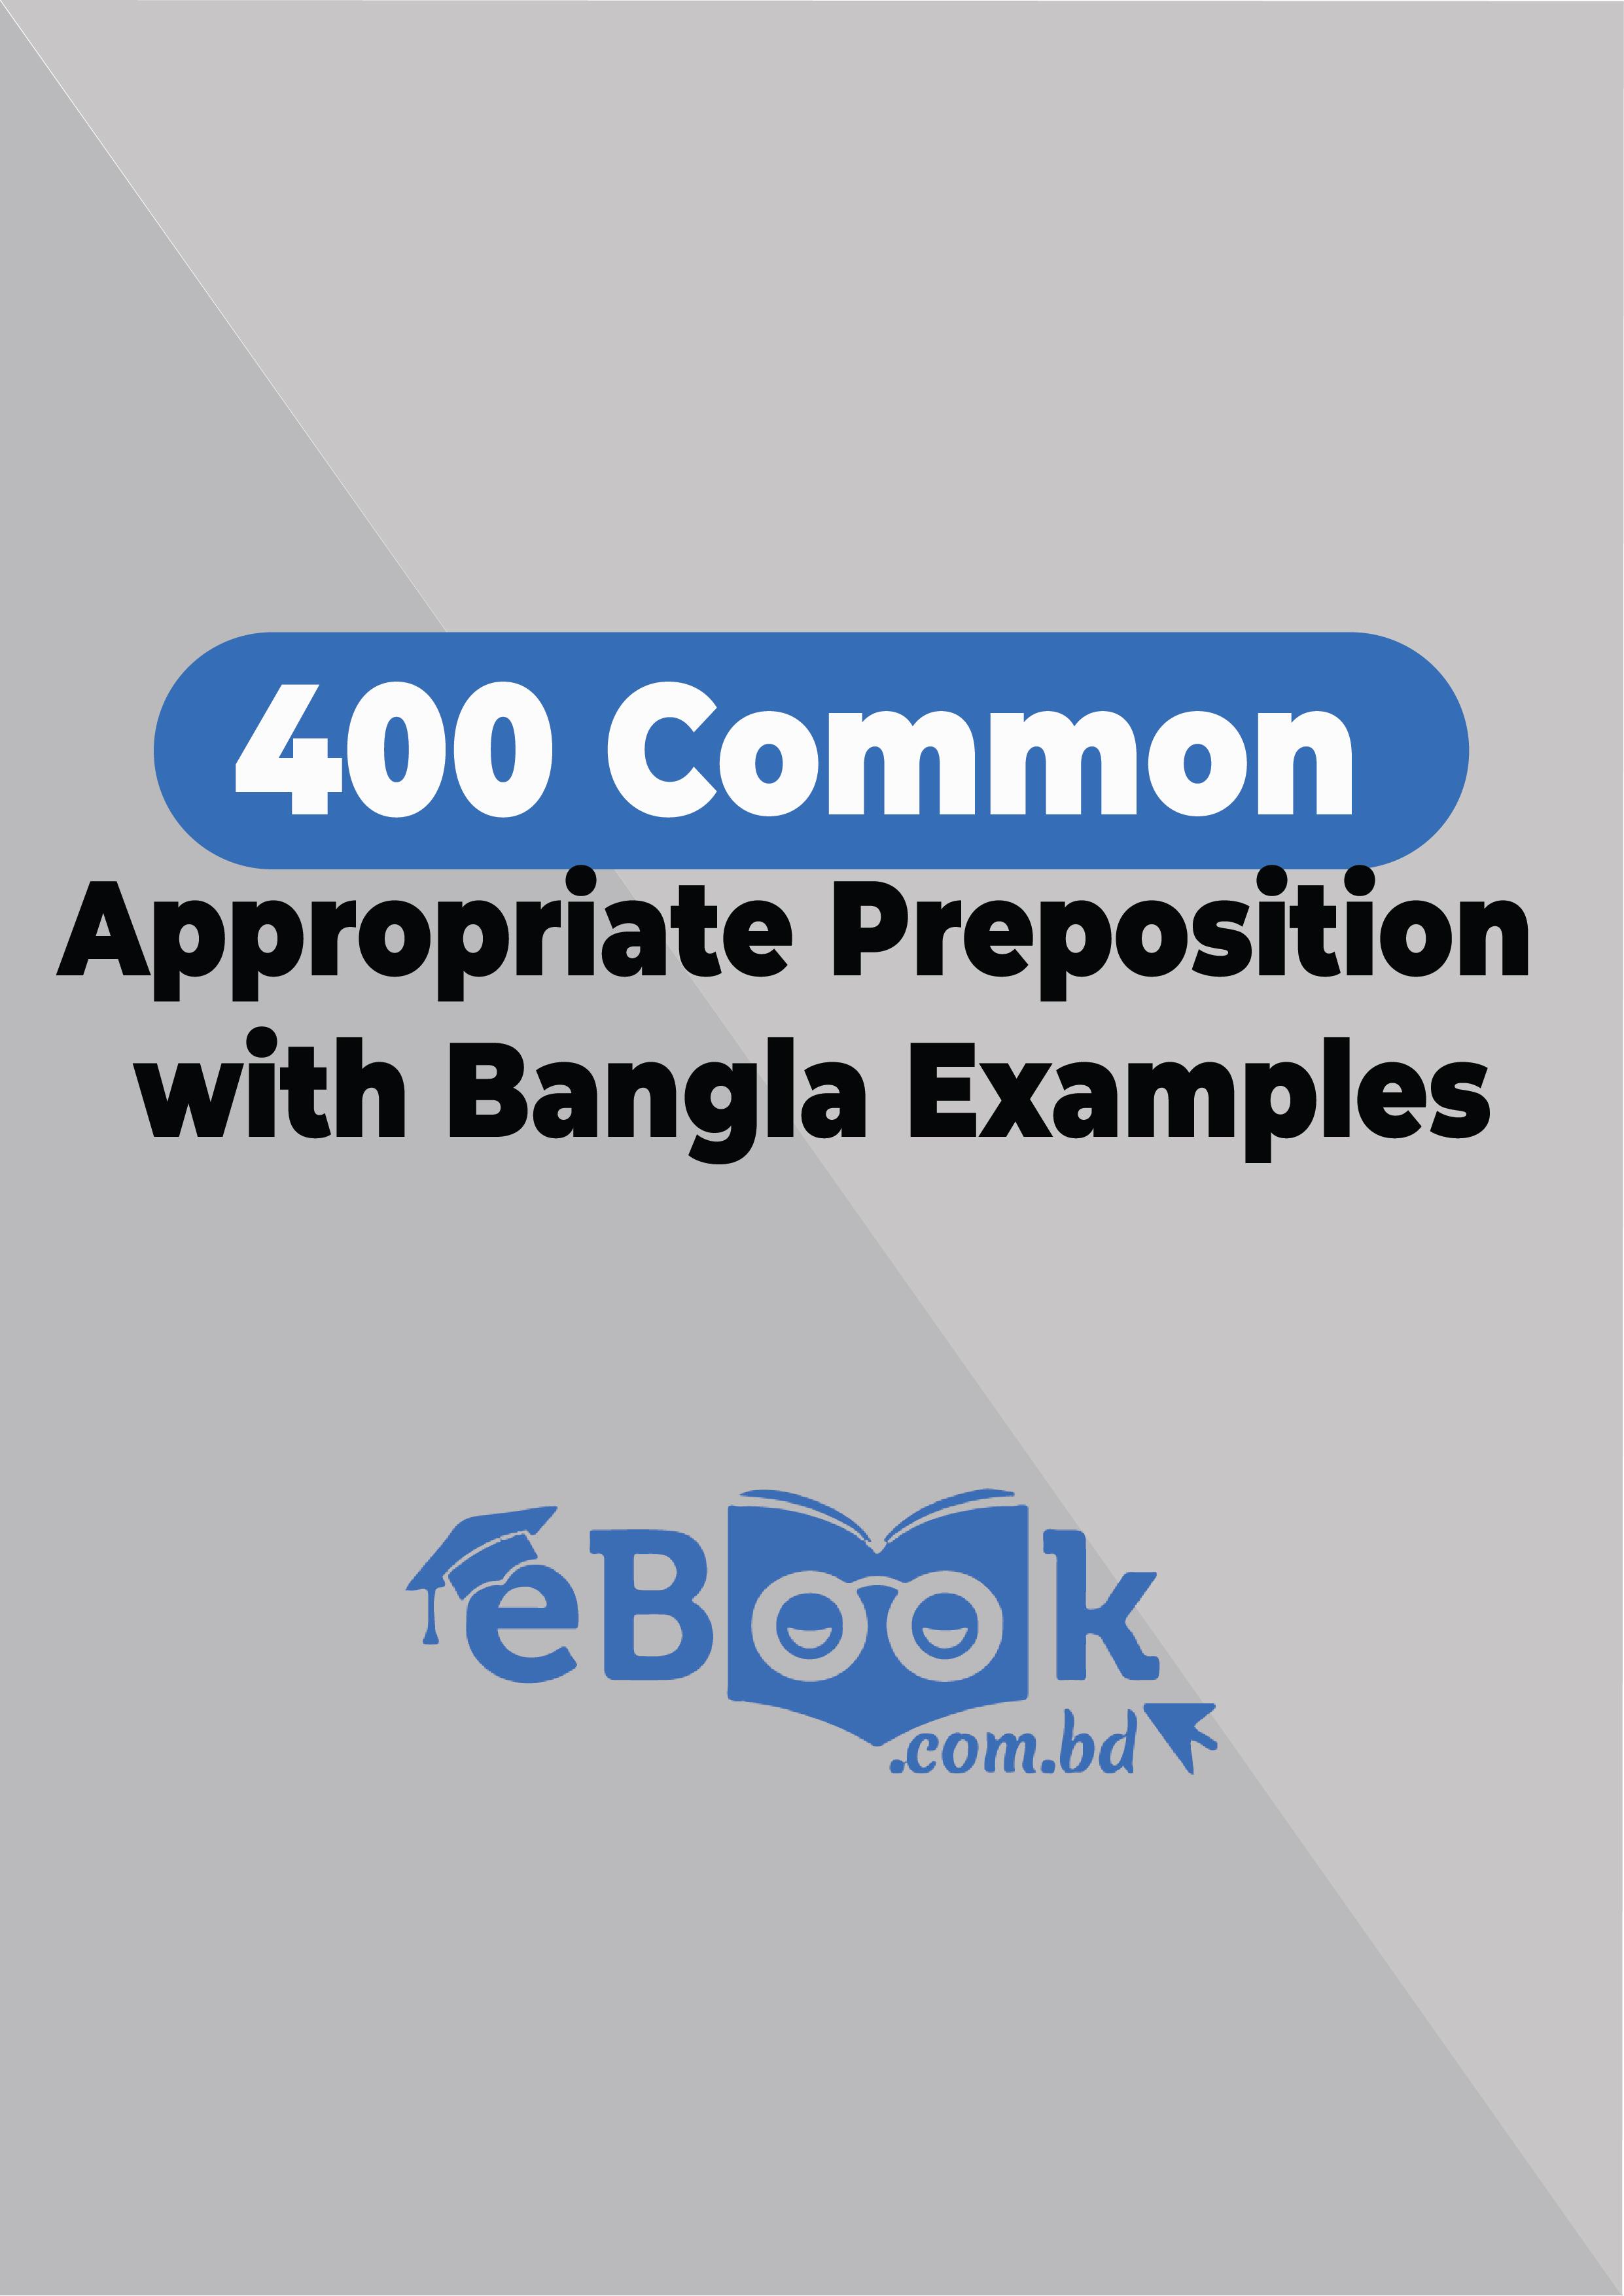 Thumbnail of 400 Common  Appropriate Preposition  with Bangla Examples